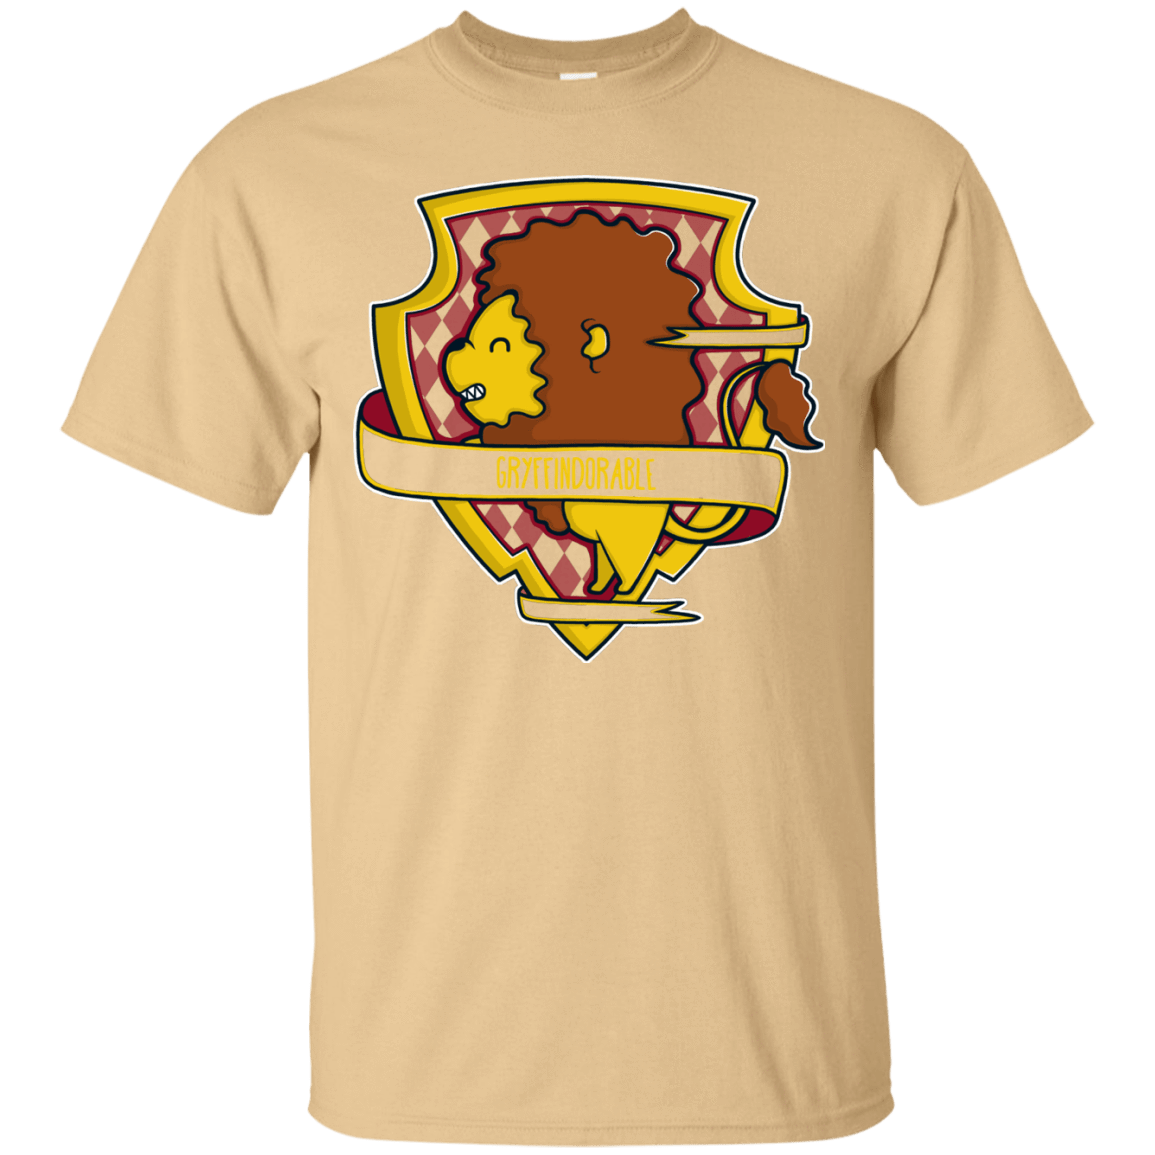 T-Shirts Vegas Gold / Small Gryffindorable T-Shirt